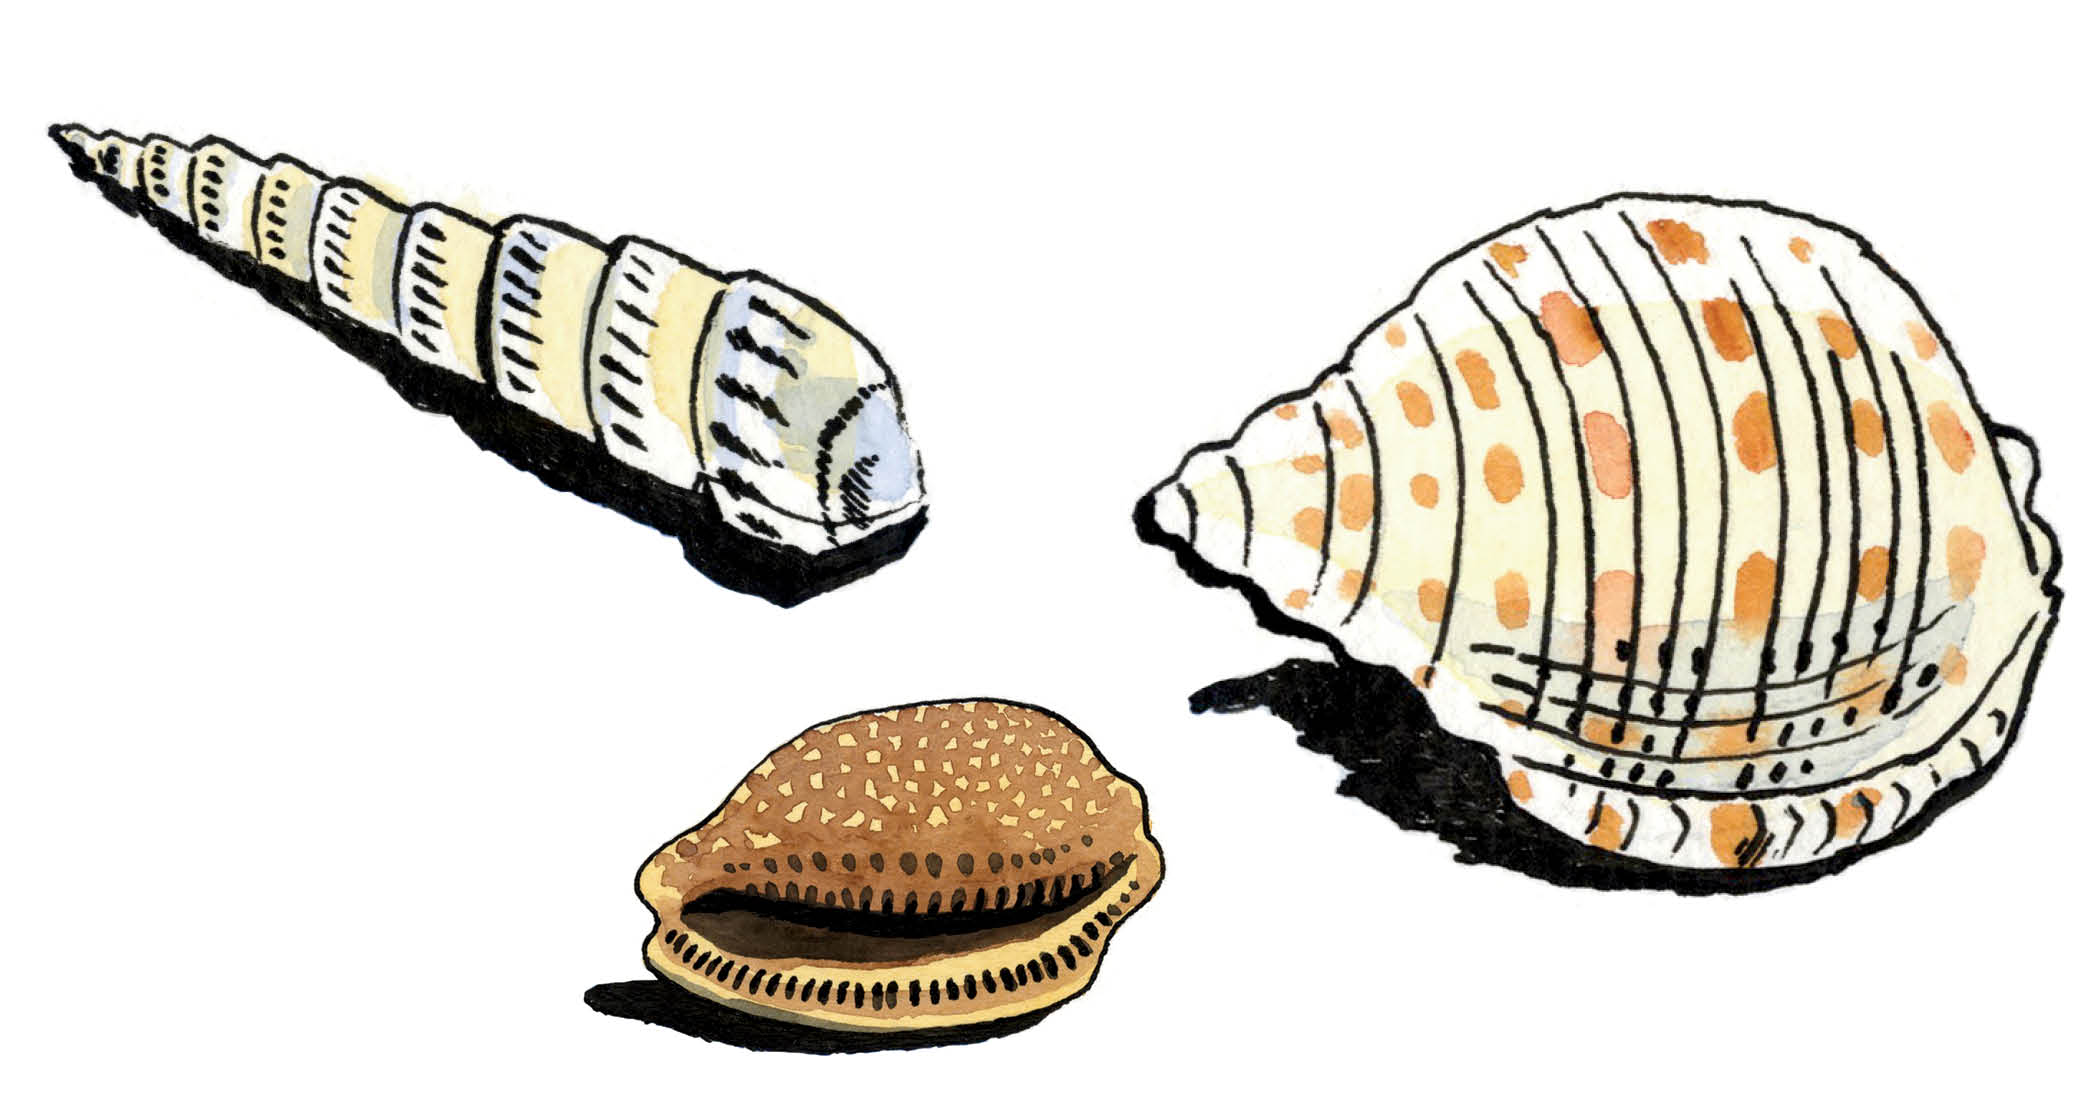 An illustrated collection of three seashells